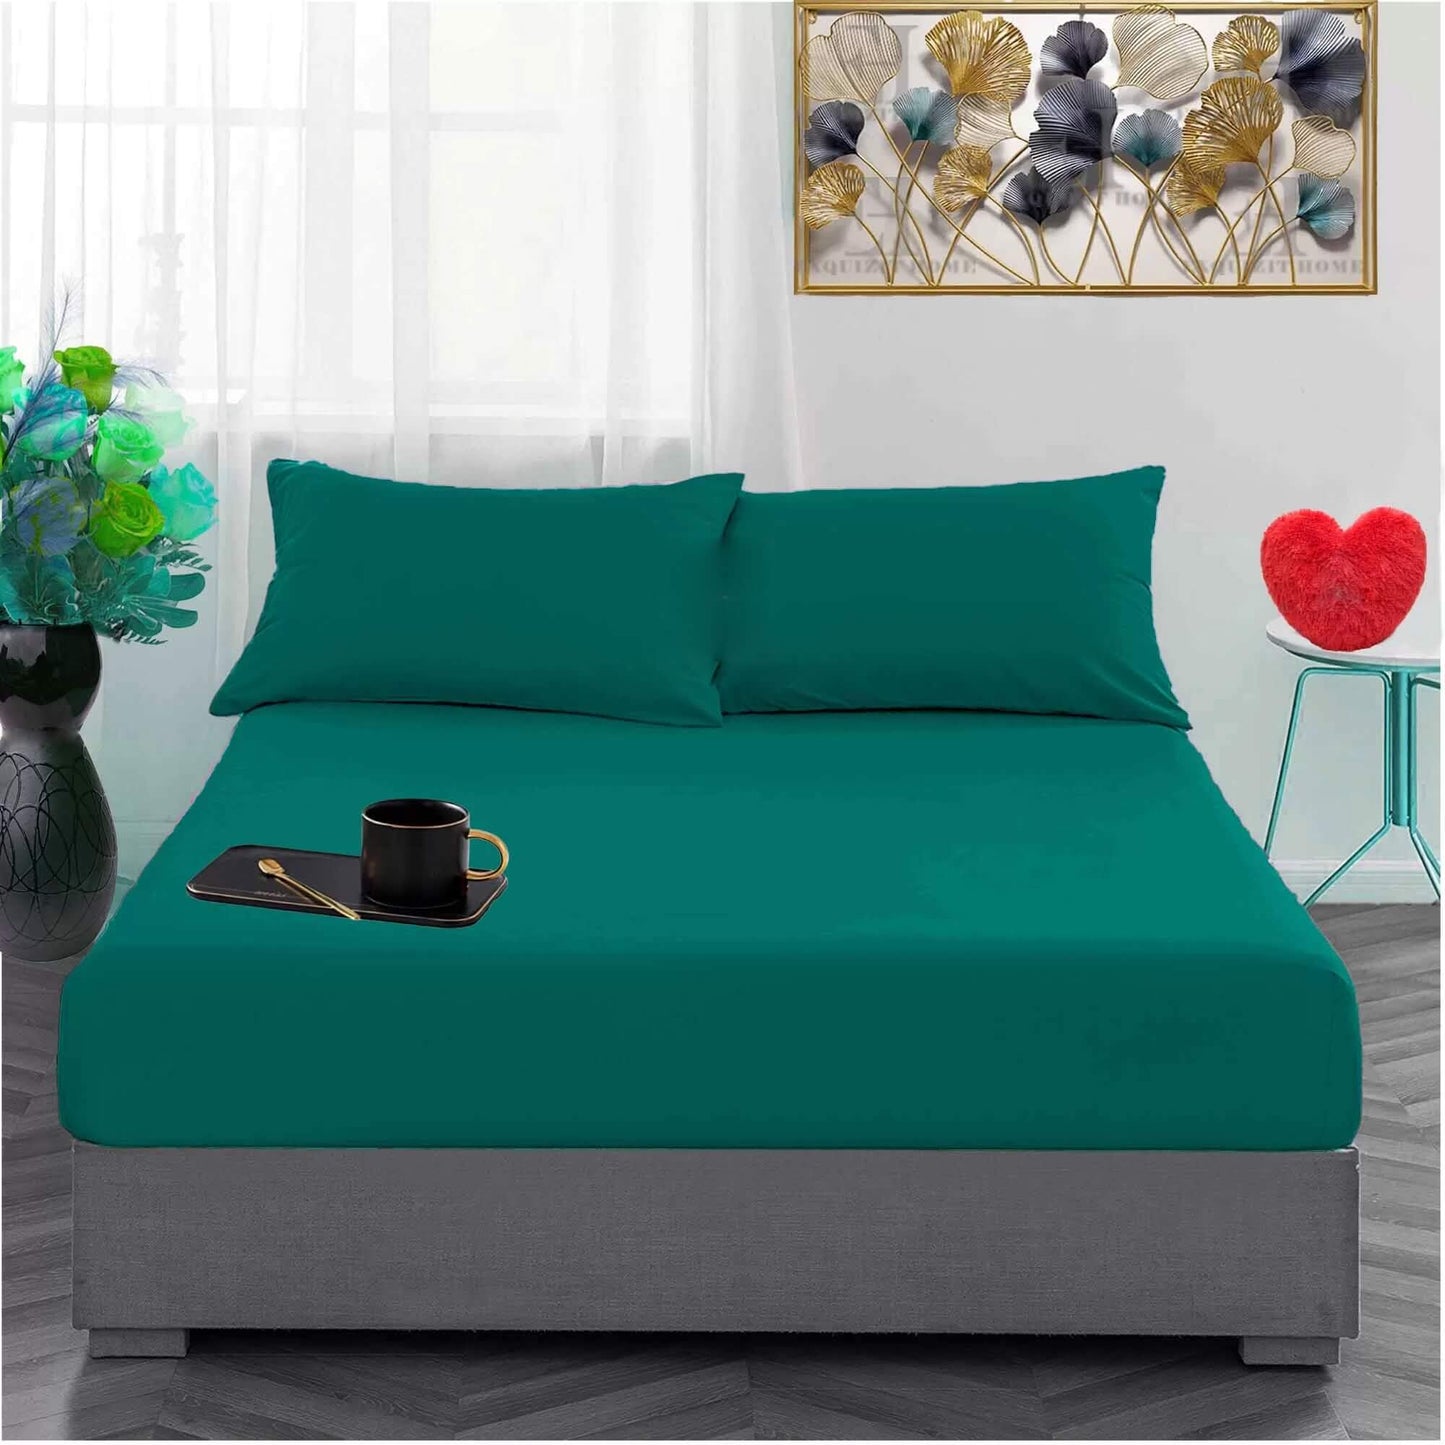 Small Double Fitted Sheet 100% Brushed Cotton Bed Sheet - TheComfortshop.co.ukBed Sheets0721718977261thecomfortshopTheComfortshop.co.ukFlannelette FIT Teal 4FT-1Teal4FT Small DoubleSmall Double Fitted Sheet 100% Brushed Cotton Bed Sheet - TheComfortshop.co.uk